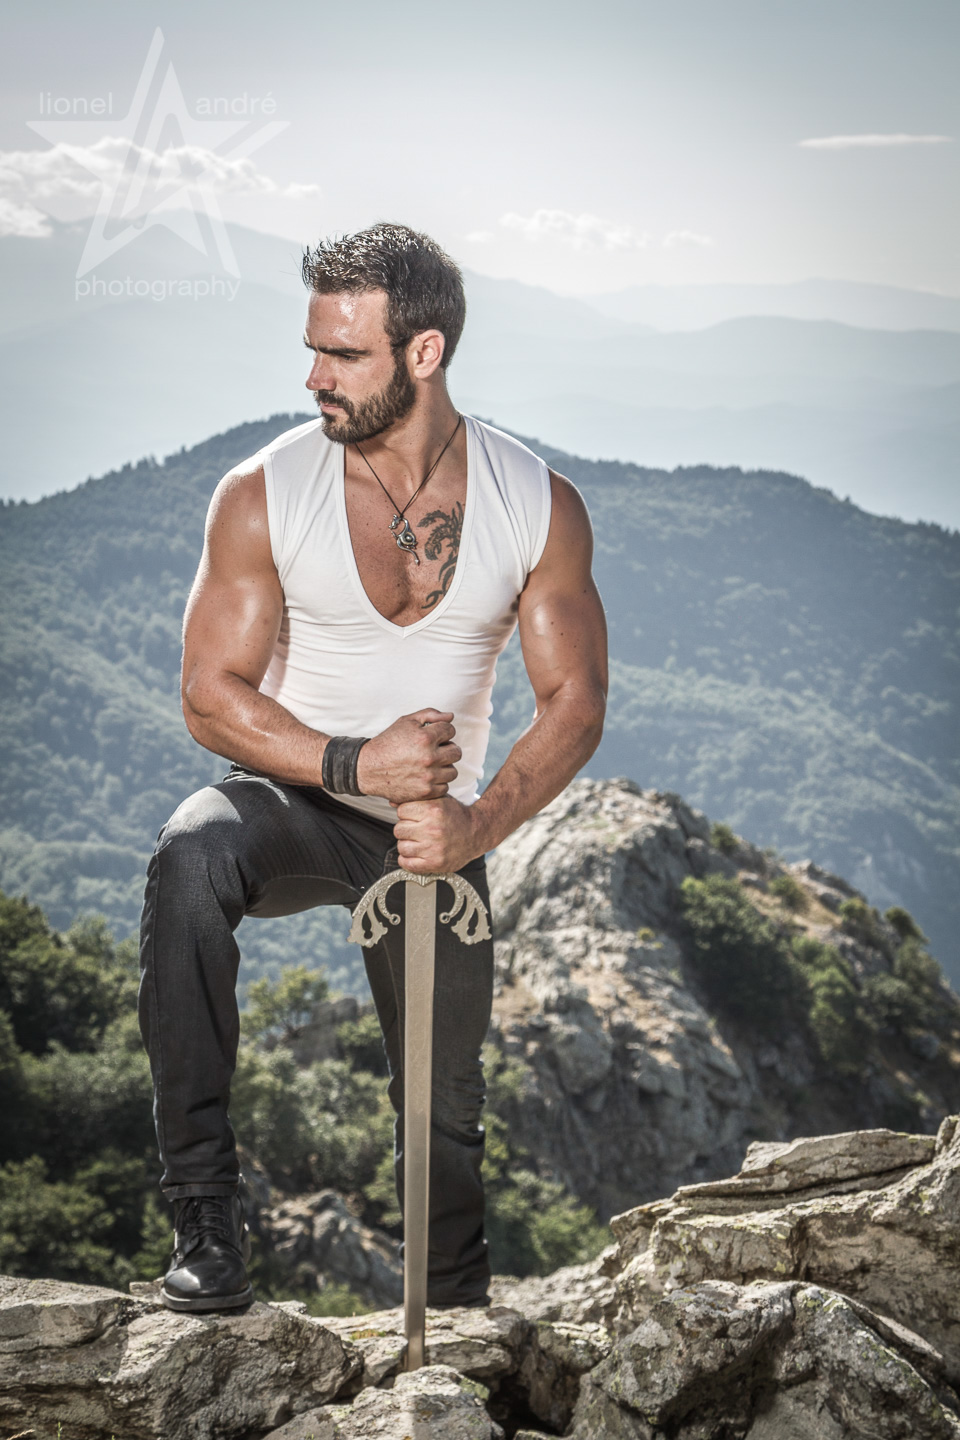 Adobe Portfolio lionel andre photography jess vill model French fitness model six pack Sword stone The Sword in the stone légende King Arthur